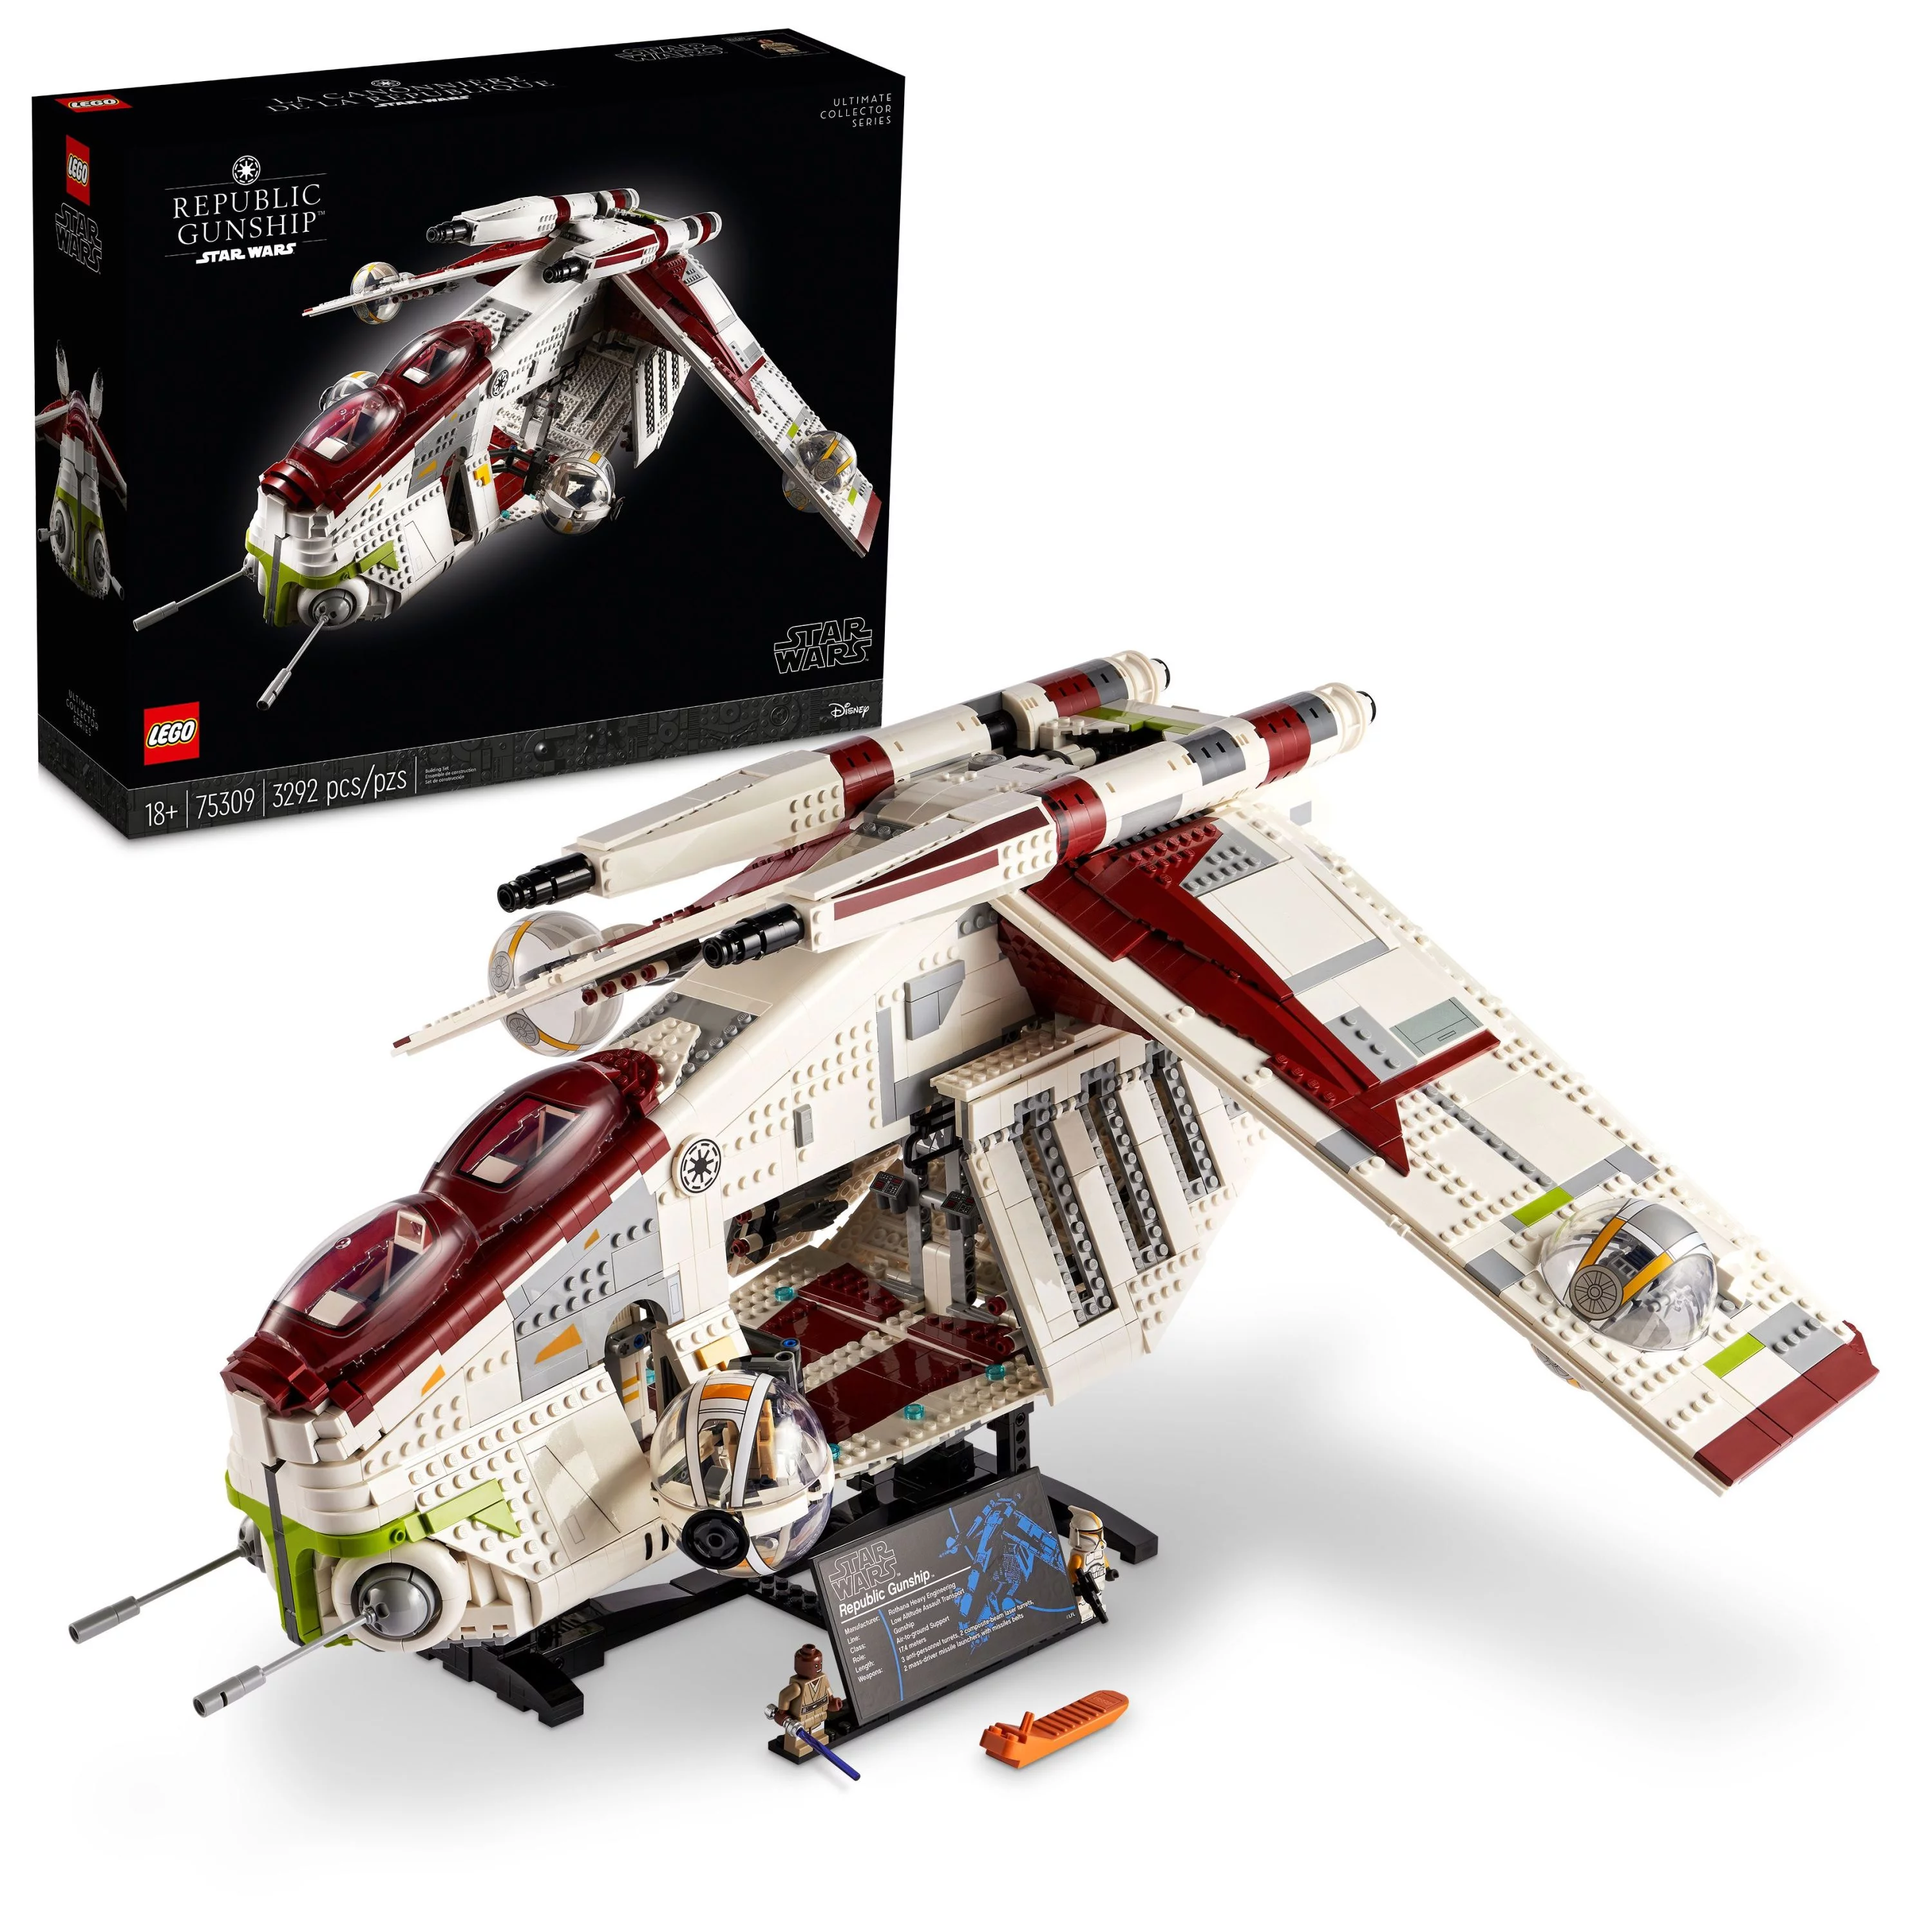 LEGO Star Wars Republic Gunship 75309 UCS Display Model Kit for Adults to Build, Ultimate Collector Series, Office or Home Decor Gift Idea